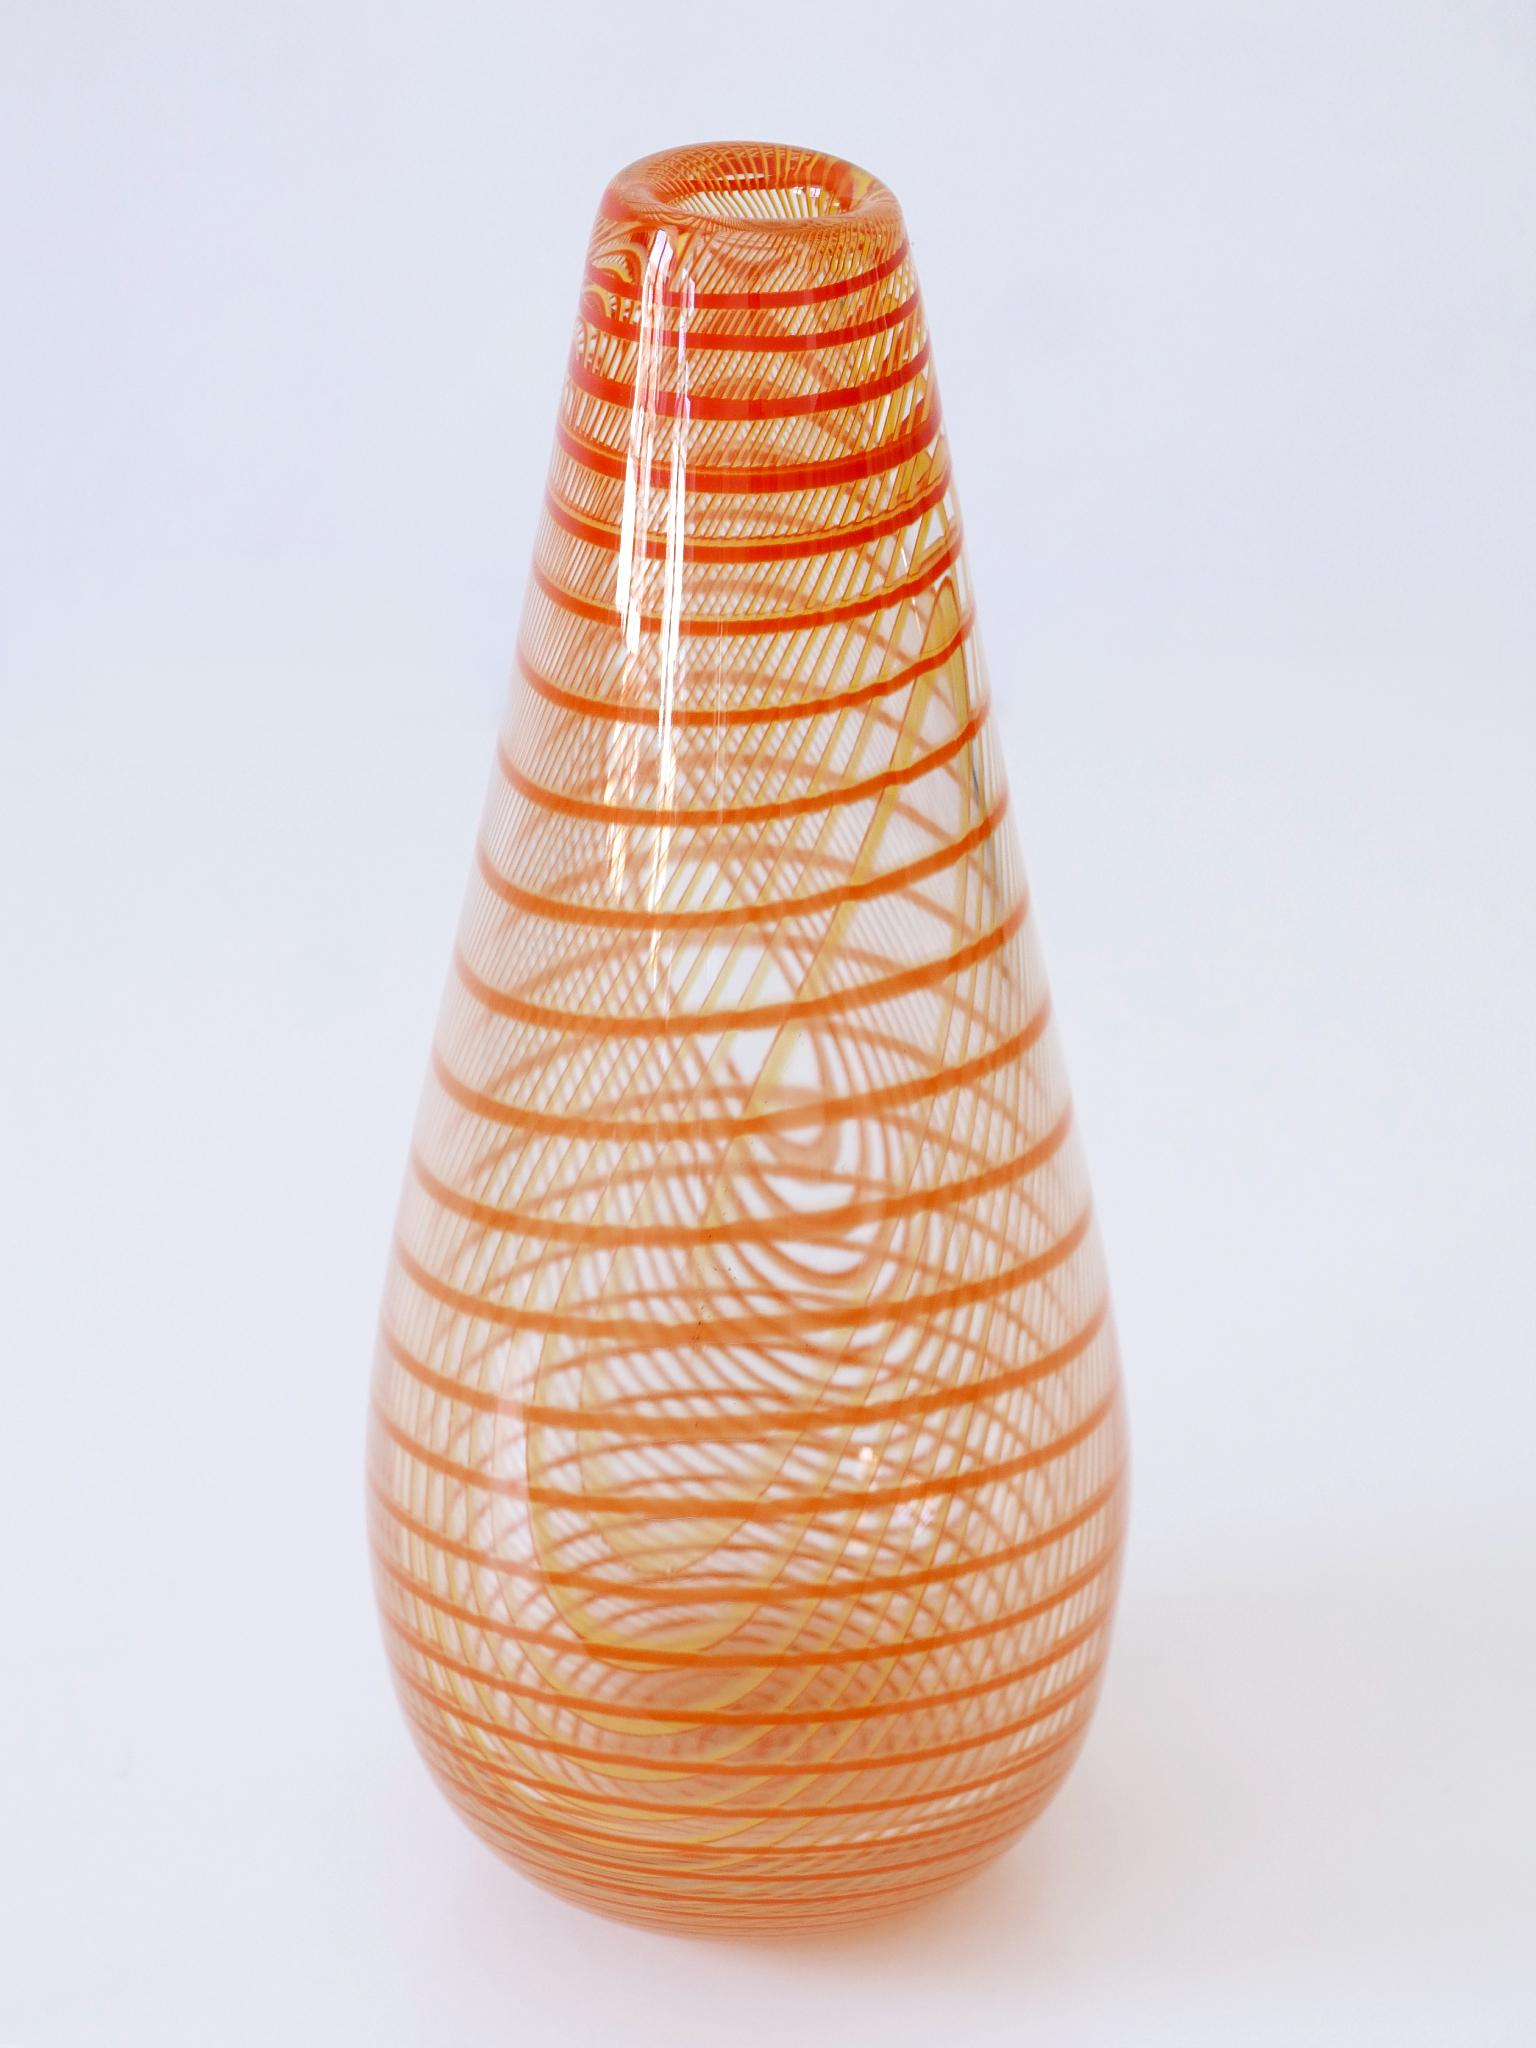 Signed & Limited Edition Art Glass Vase by Olle Brozén for Kosta Boda Sweden For Sale 6